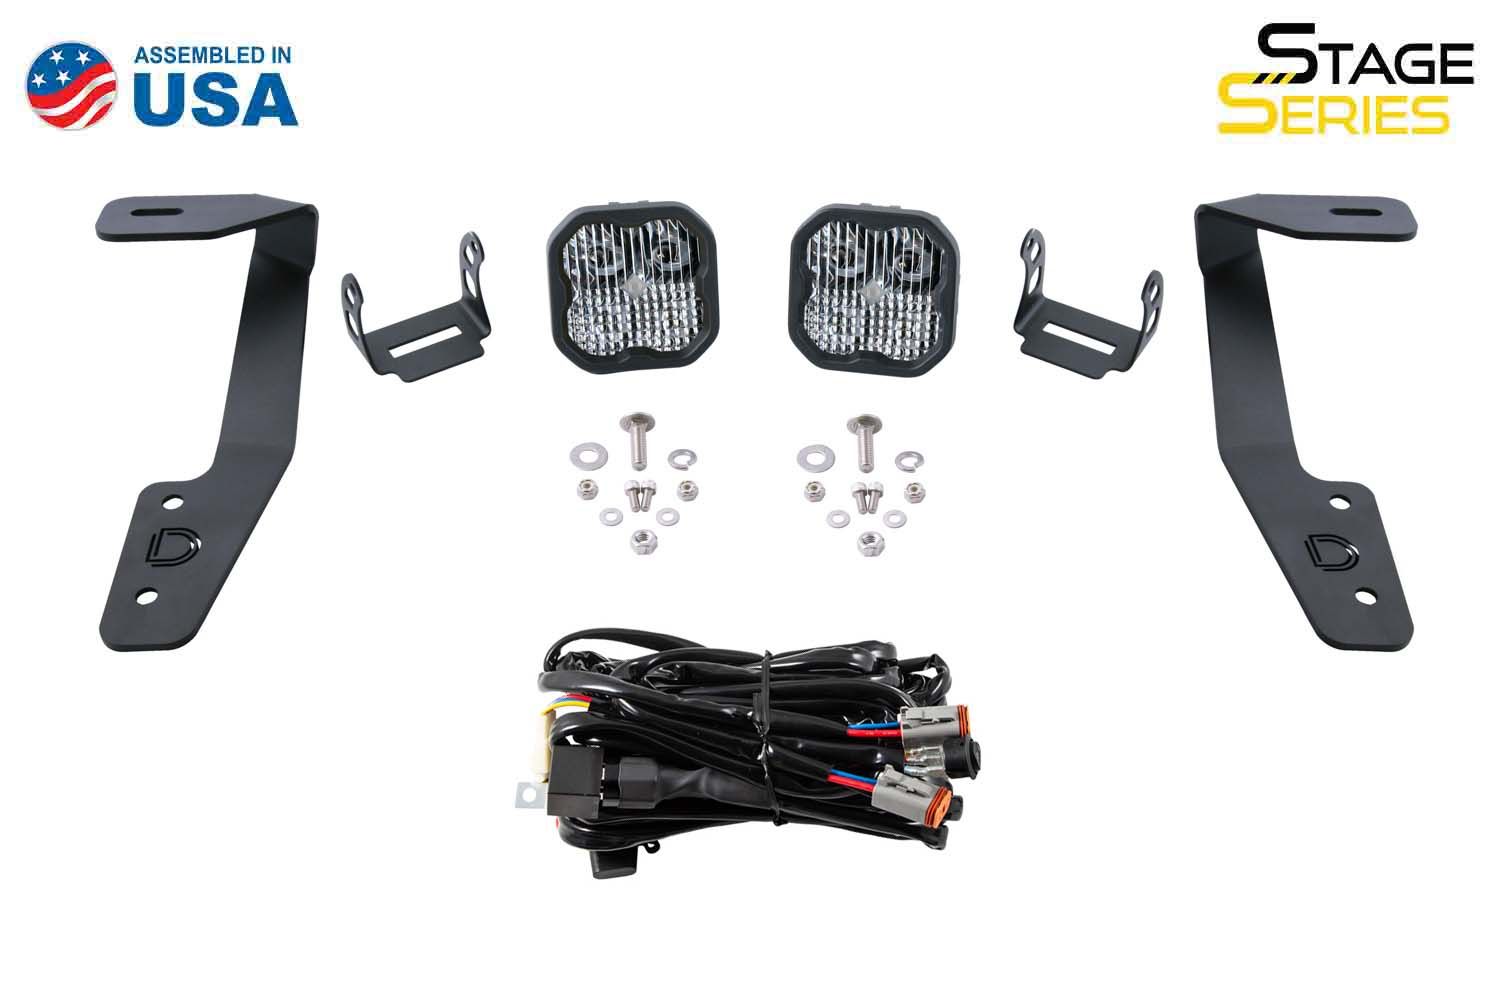 Stage Series Backlit Ditch Light Kit For 2022-2023 Subaru WRX